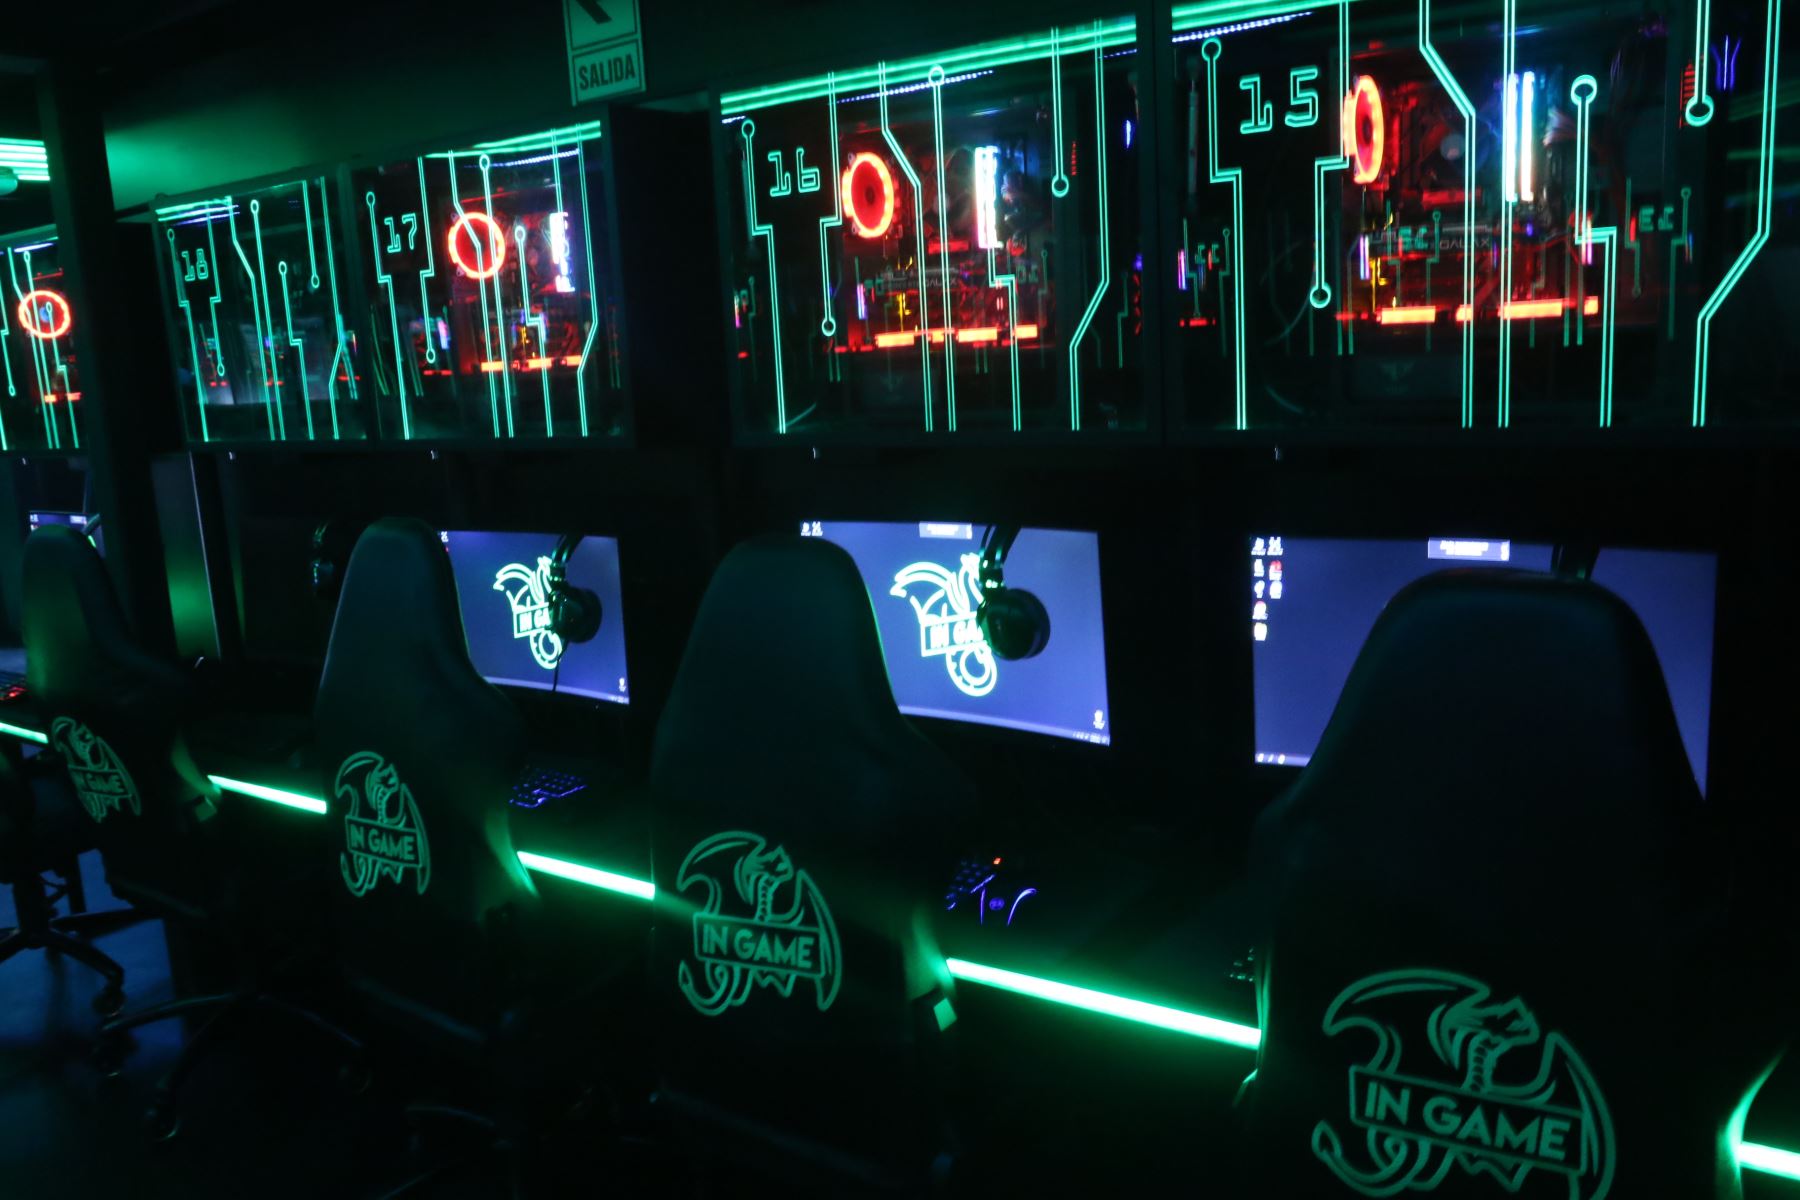 Peru inaugurates its first high-performance center for esports
Latest